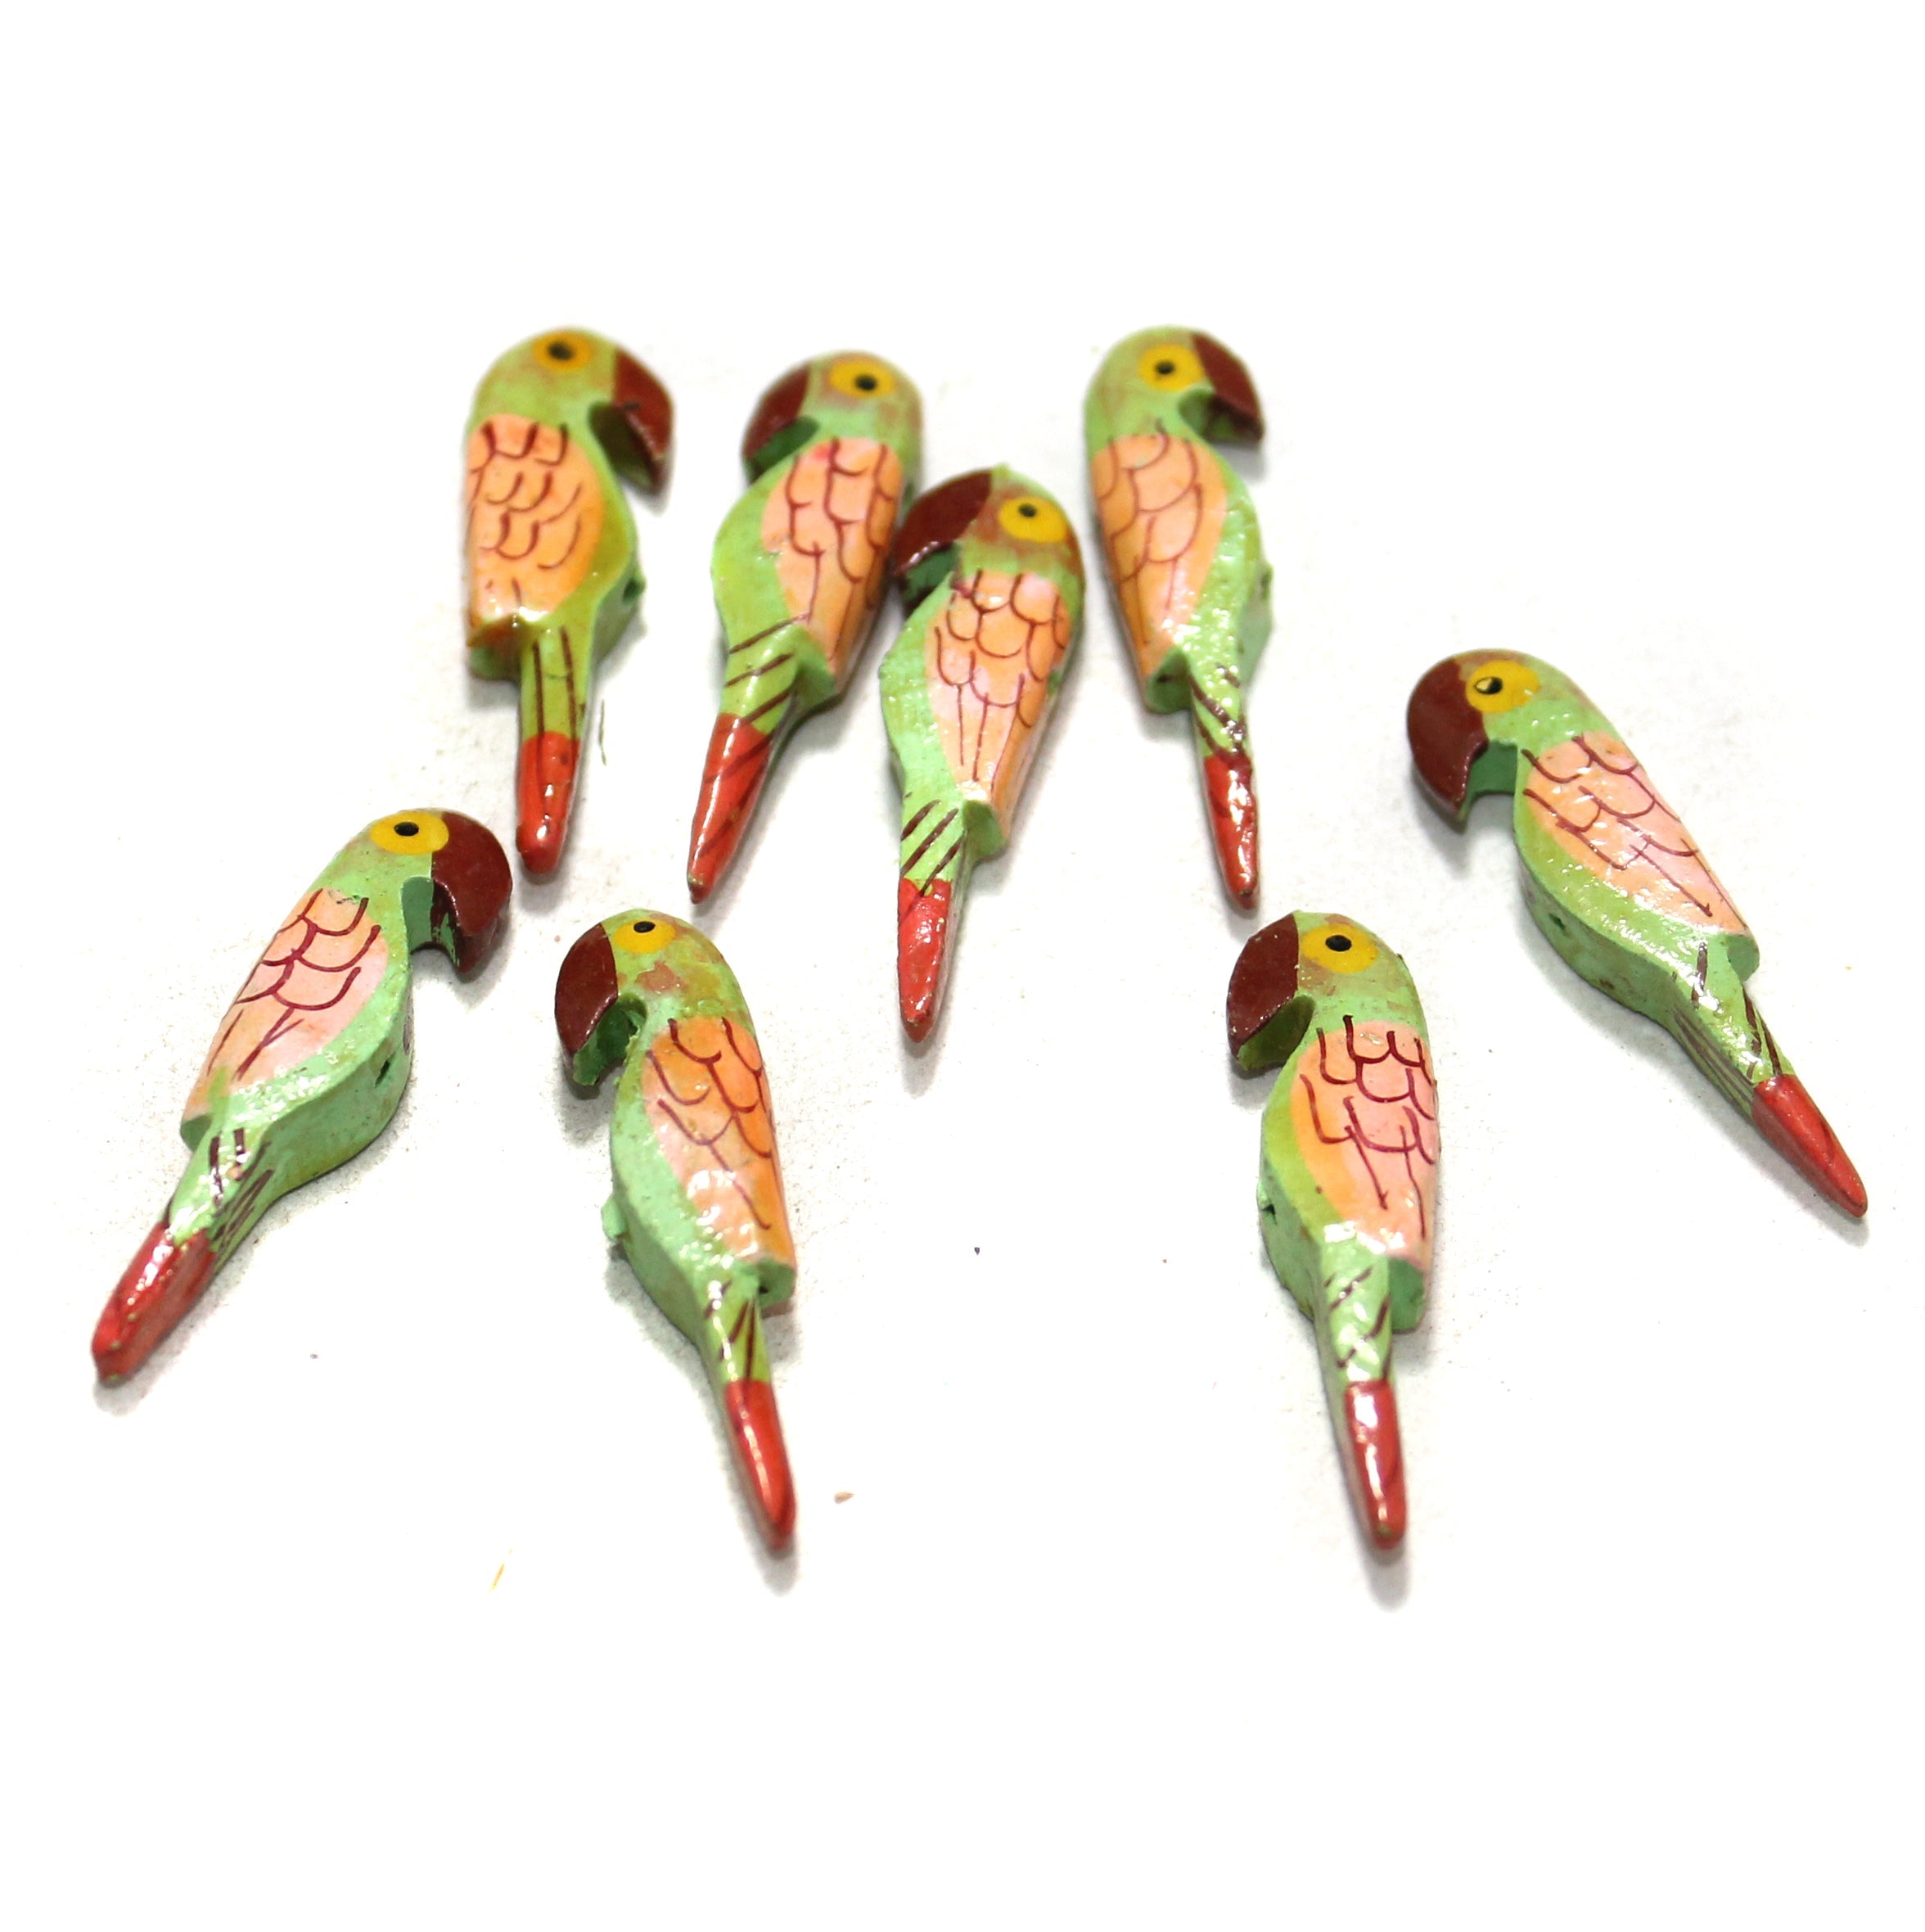 50 Pcs Parrots Wooden Beads, Size 1.5 Inches